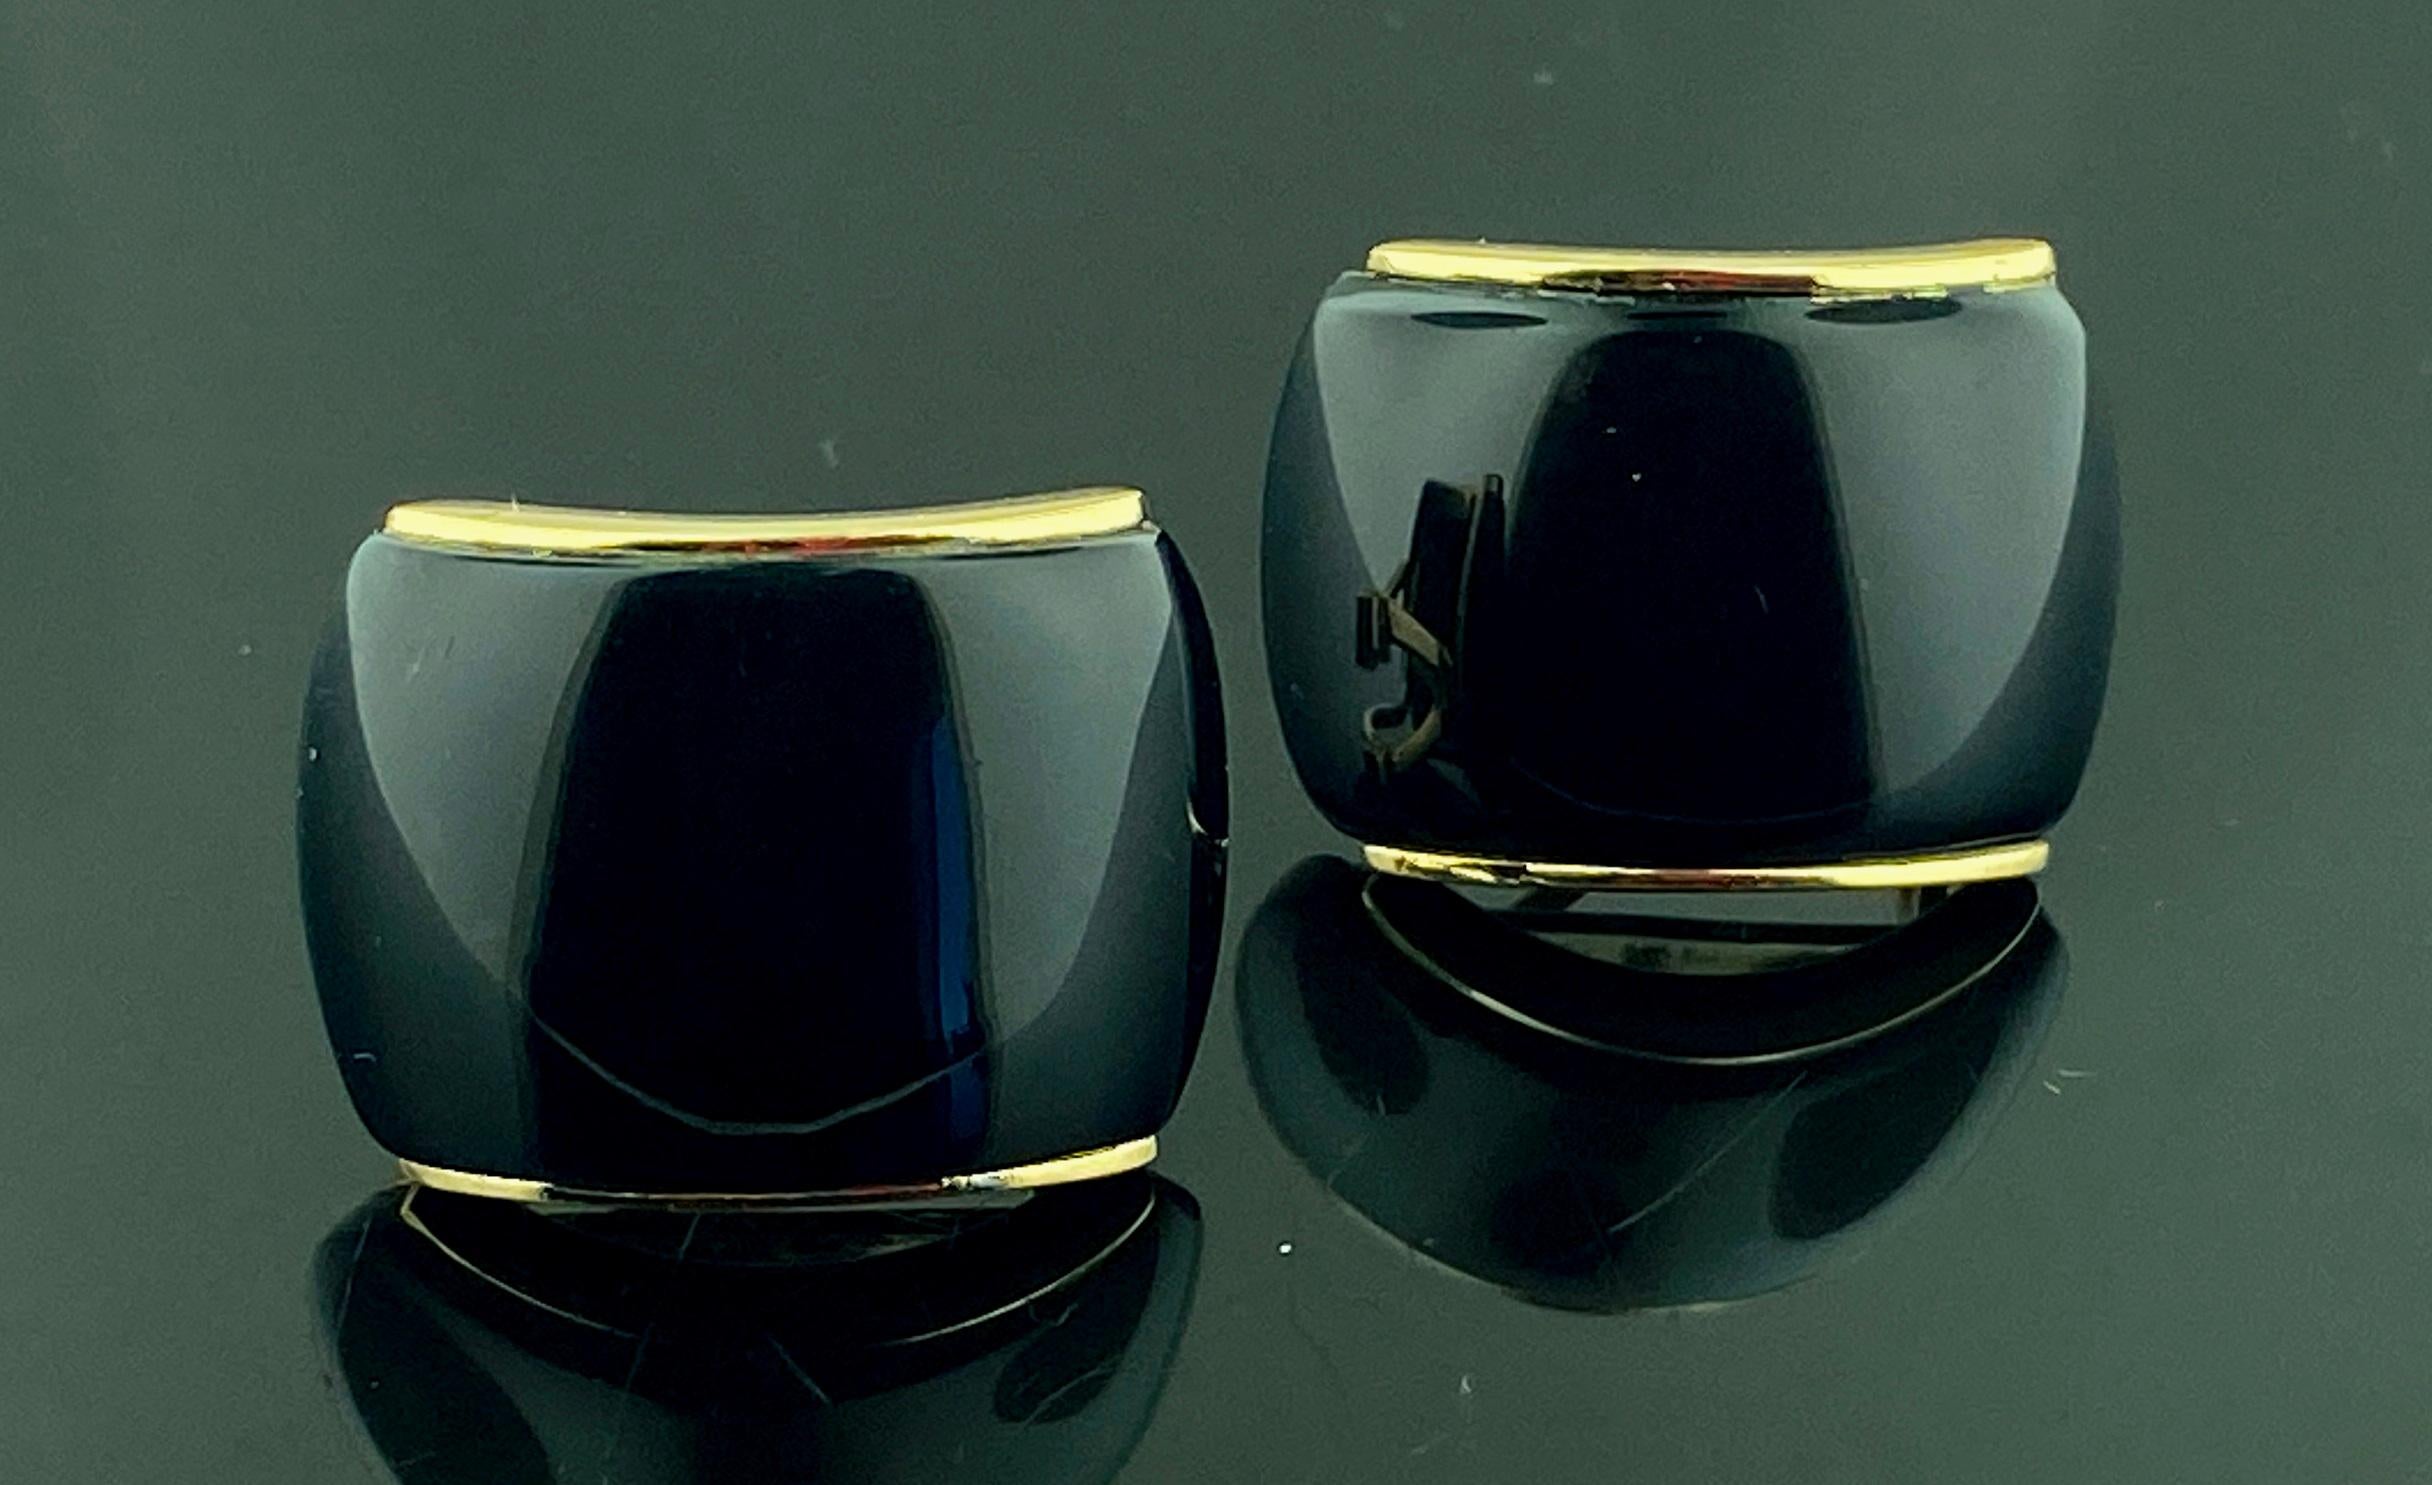 Black Onyx earrings set in 14 karat yellow gold, with a weight of 8.48 grams.